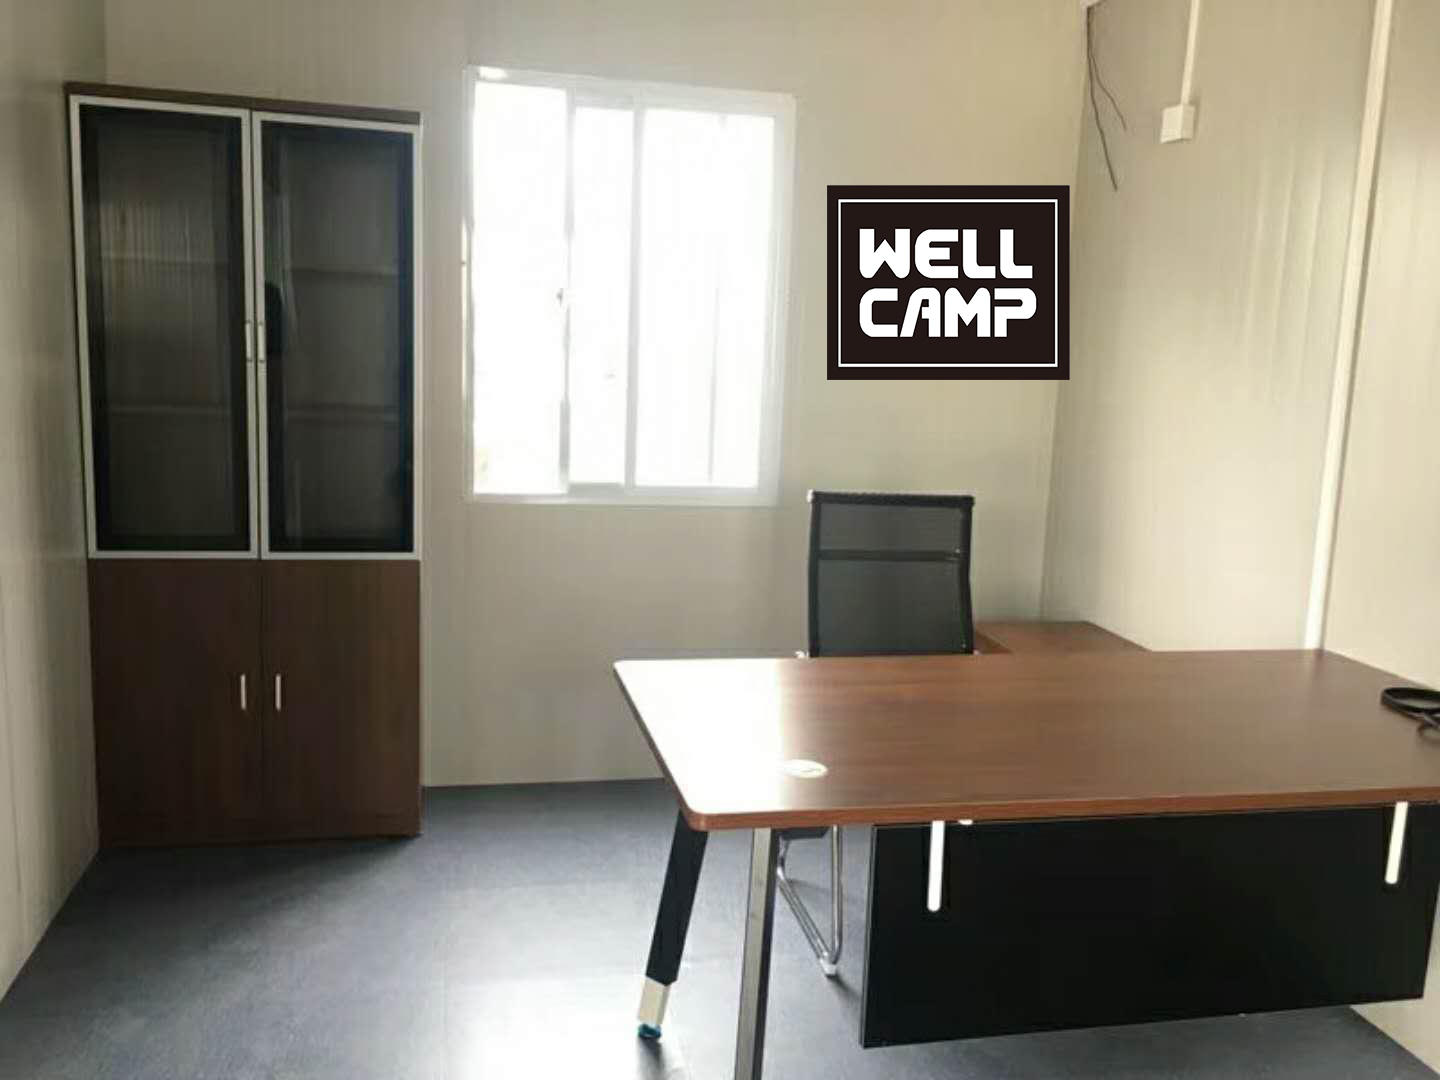 WELLCAMP two floors 20ft 40ft flat pack prefab container house easy to install modern modular homes